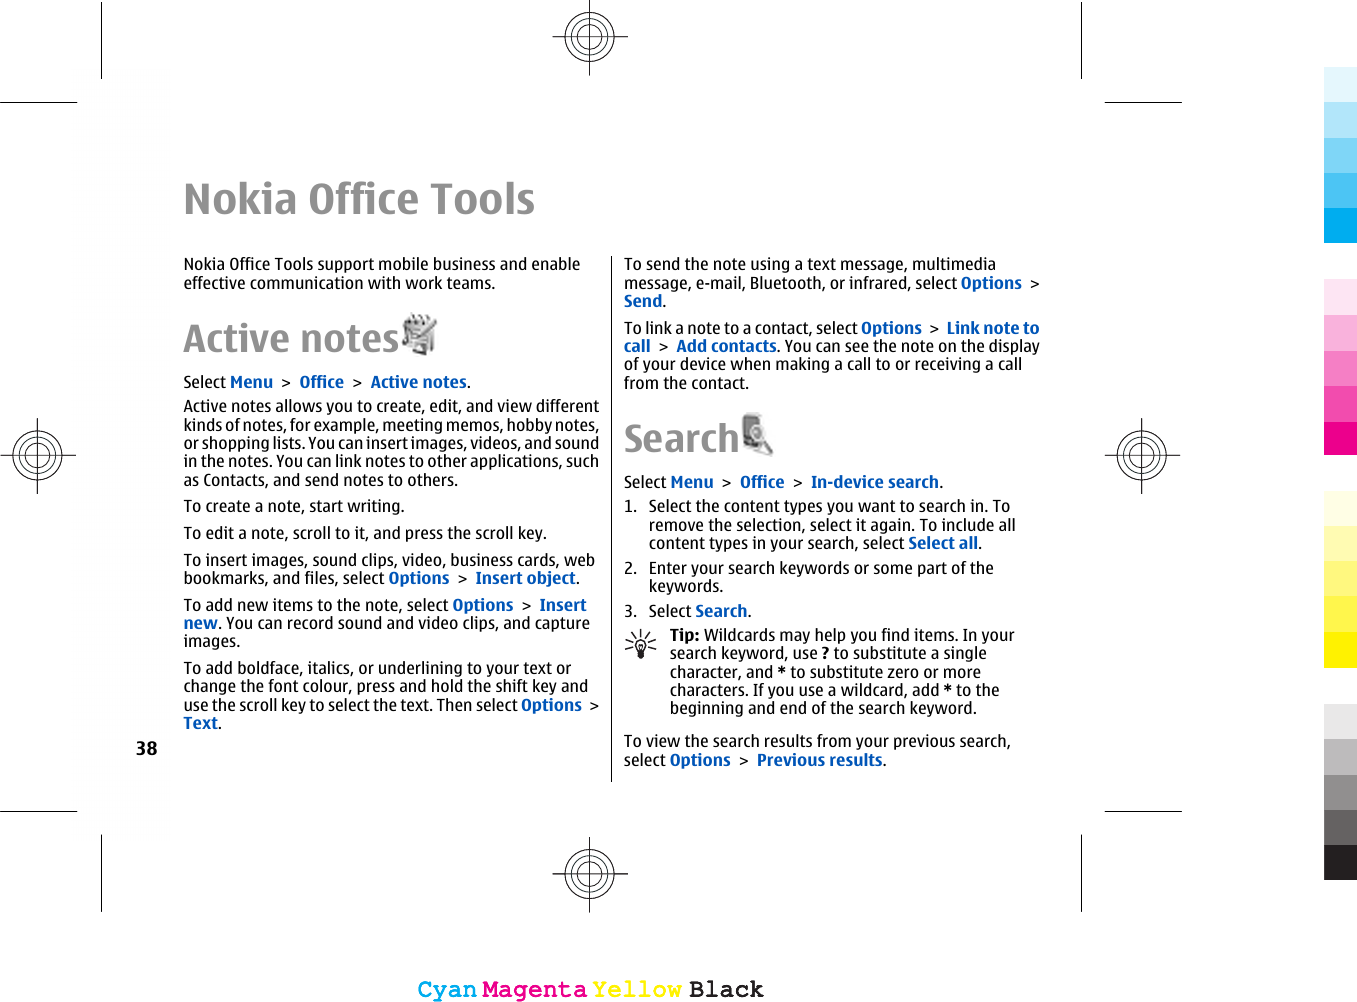 Nokia Office ToolsNokia Office Tools support mobile business and enableeffective communication with work teams.Active notesSelect Menu &gt; Office &gt; Active notes.Active notes allows you to create, edit, and view differentkinds of notes, for example, meeting memos, hobby notes,or shopping lists. You can insert images, videos, and soundin the notes. You can link notes to other applications, suchas Contacts, and send notes to others.To create a note, start writing.To edit a note, scroll to it, and press the scroll key.To insert images, sound clips, video, business cards, webbookmarks, and files, select Options &gt; Insert object.To add new items to the note, select Options &gt; Insertnew. You can record sound and video clips, and captureimages.To add boldface, italics, or underlining to your text orchange the font colour, press and hold the shift key anduse the scroll key to select the text. Then select Options &gt;Text.To send the note using a text message, multimediamessage, e-mail, Bluetooth, or infrared, select Options &gt;Send.To link a note to a contact, select Options &gt; Link note tocall &gt; Add contacts. You can see the note on the displayof your device when making a call to or receiving a callfrom the contact.SearchSelect Menu &gt; Office &gt; In-device search.1. Select the content types you want to search in. Toremove the selection, select it again. To include allcontent types in your search, select Select all.2. Enter your search keywords or some part of thekeywords.3. Select Search.Tip: Wildcards may help you find items. In yoursearch keyword, use ? to substitute a singlecharacter, and * to substitute zero or morecharacters. If you use a wildcard, add * to thebeginning and end of the search keyword.To view the search results from your previous search,select Options &gt; Previous results.38CyanCyanMagentaMagentaYellowYellowBlackBlackCyanCyanMagentaMagentaYellowYellowBlackBlack